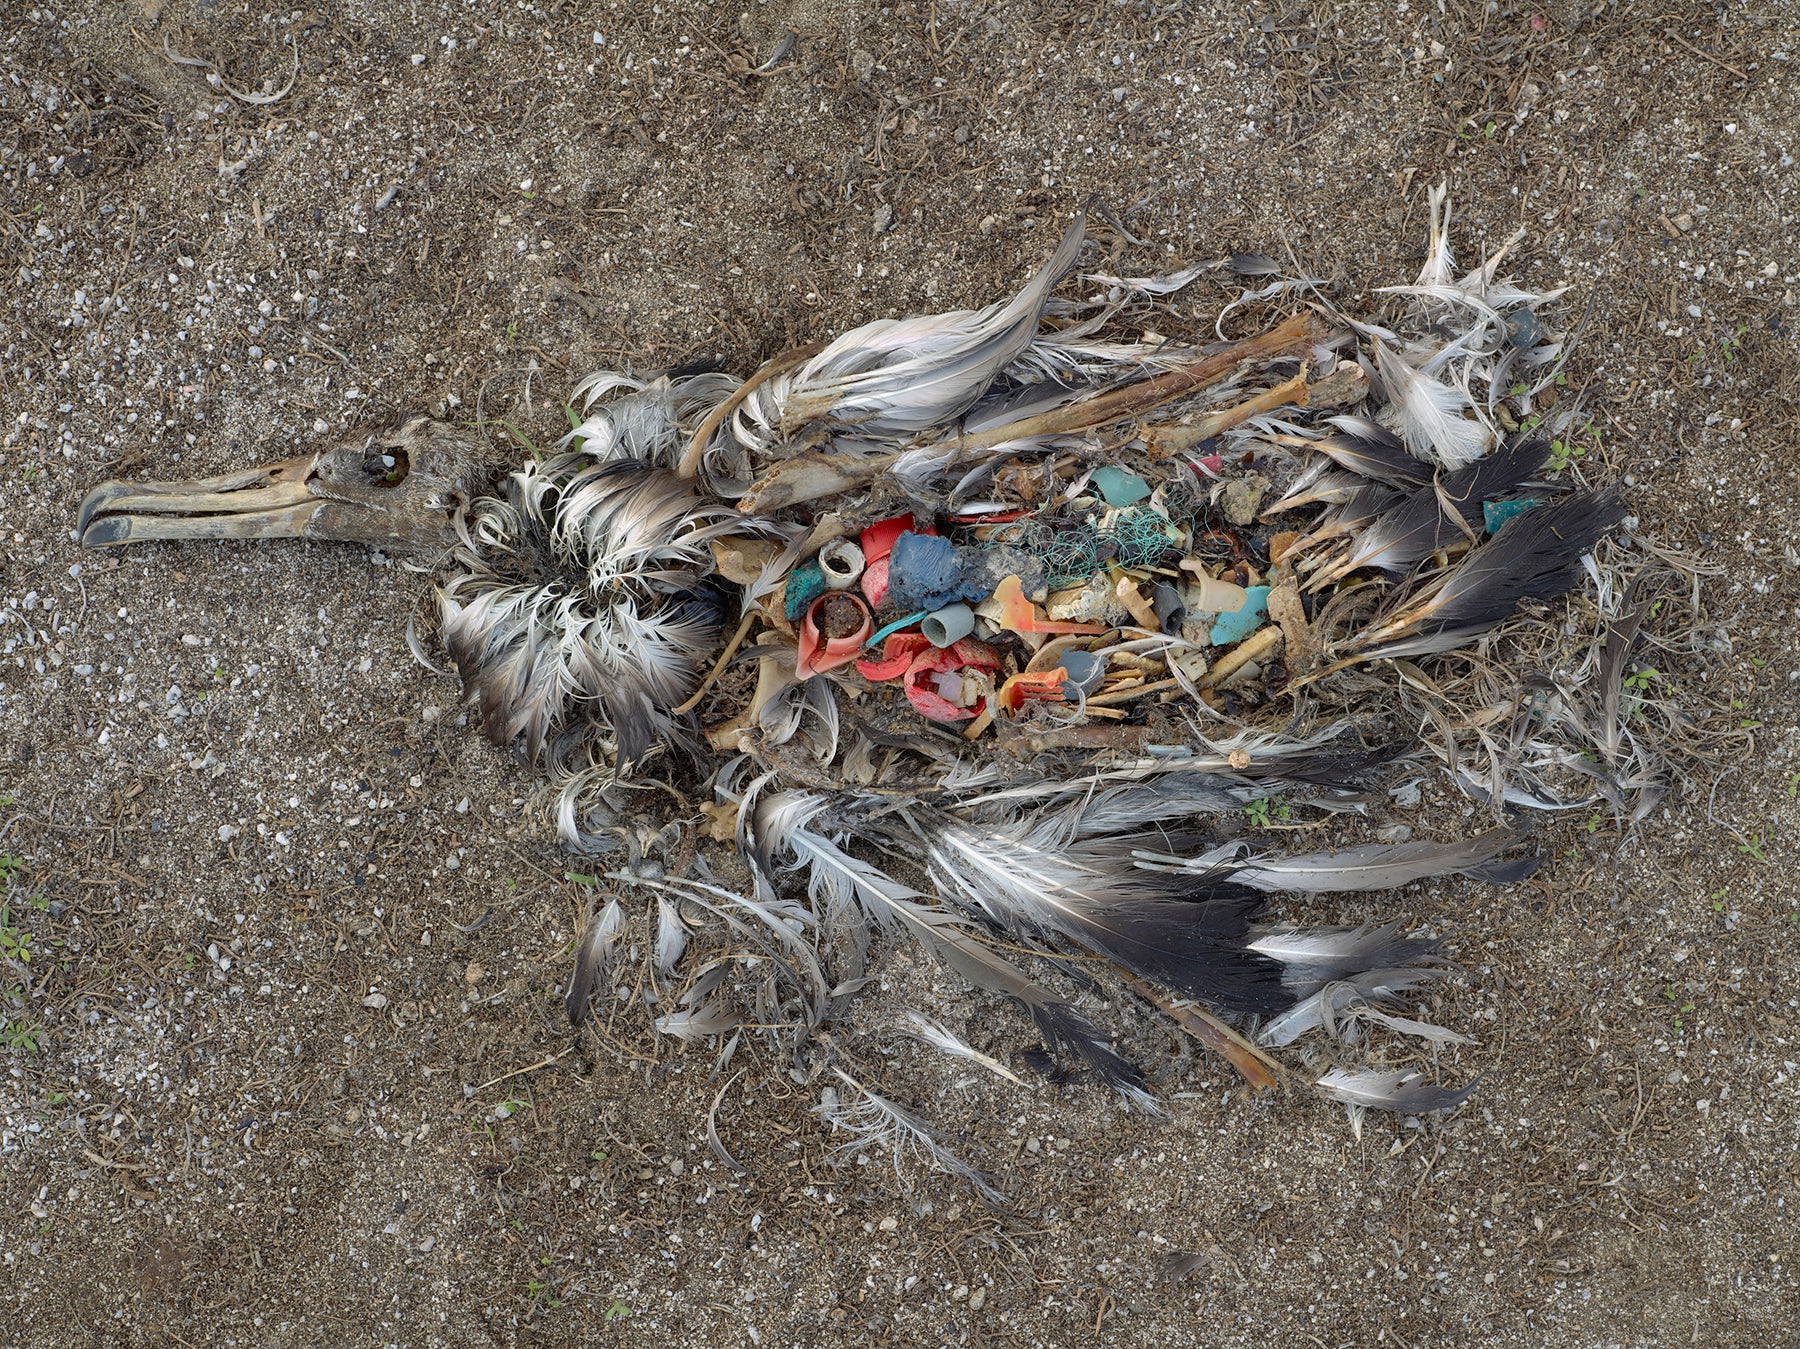 Photo  by Chris Jordan of dead baby albatross filled with plastic